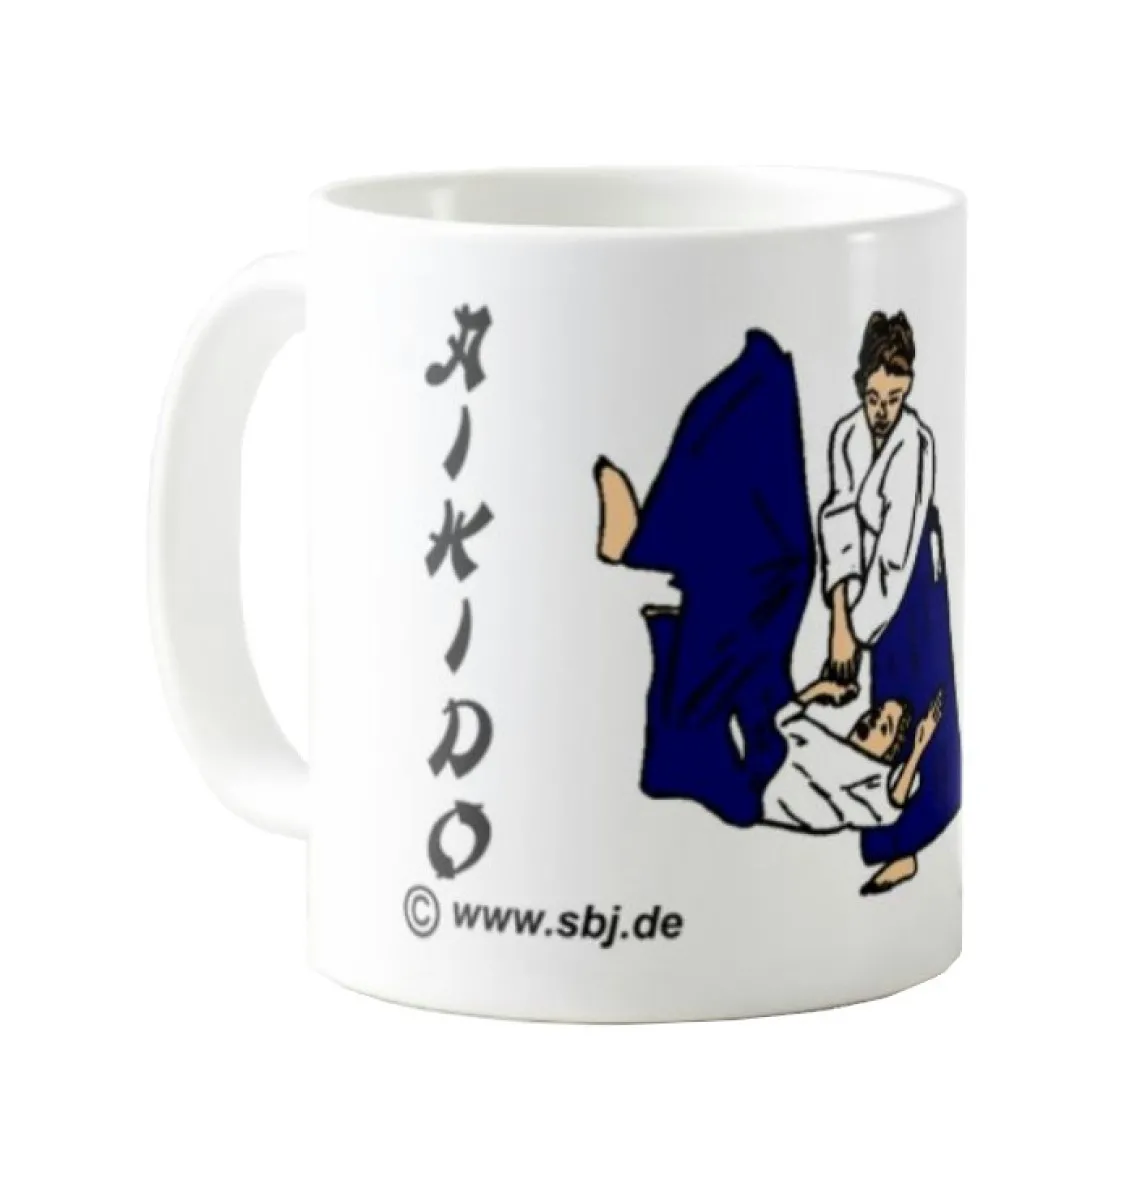 Aikido cup